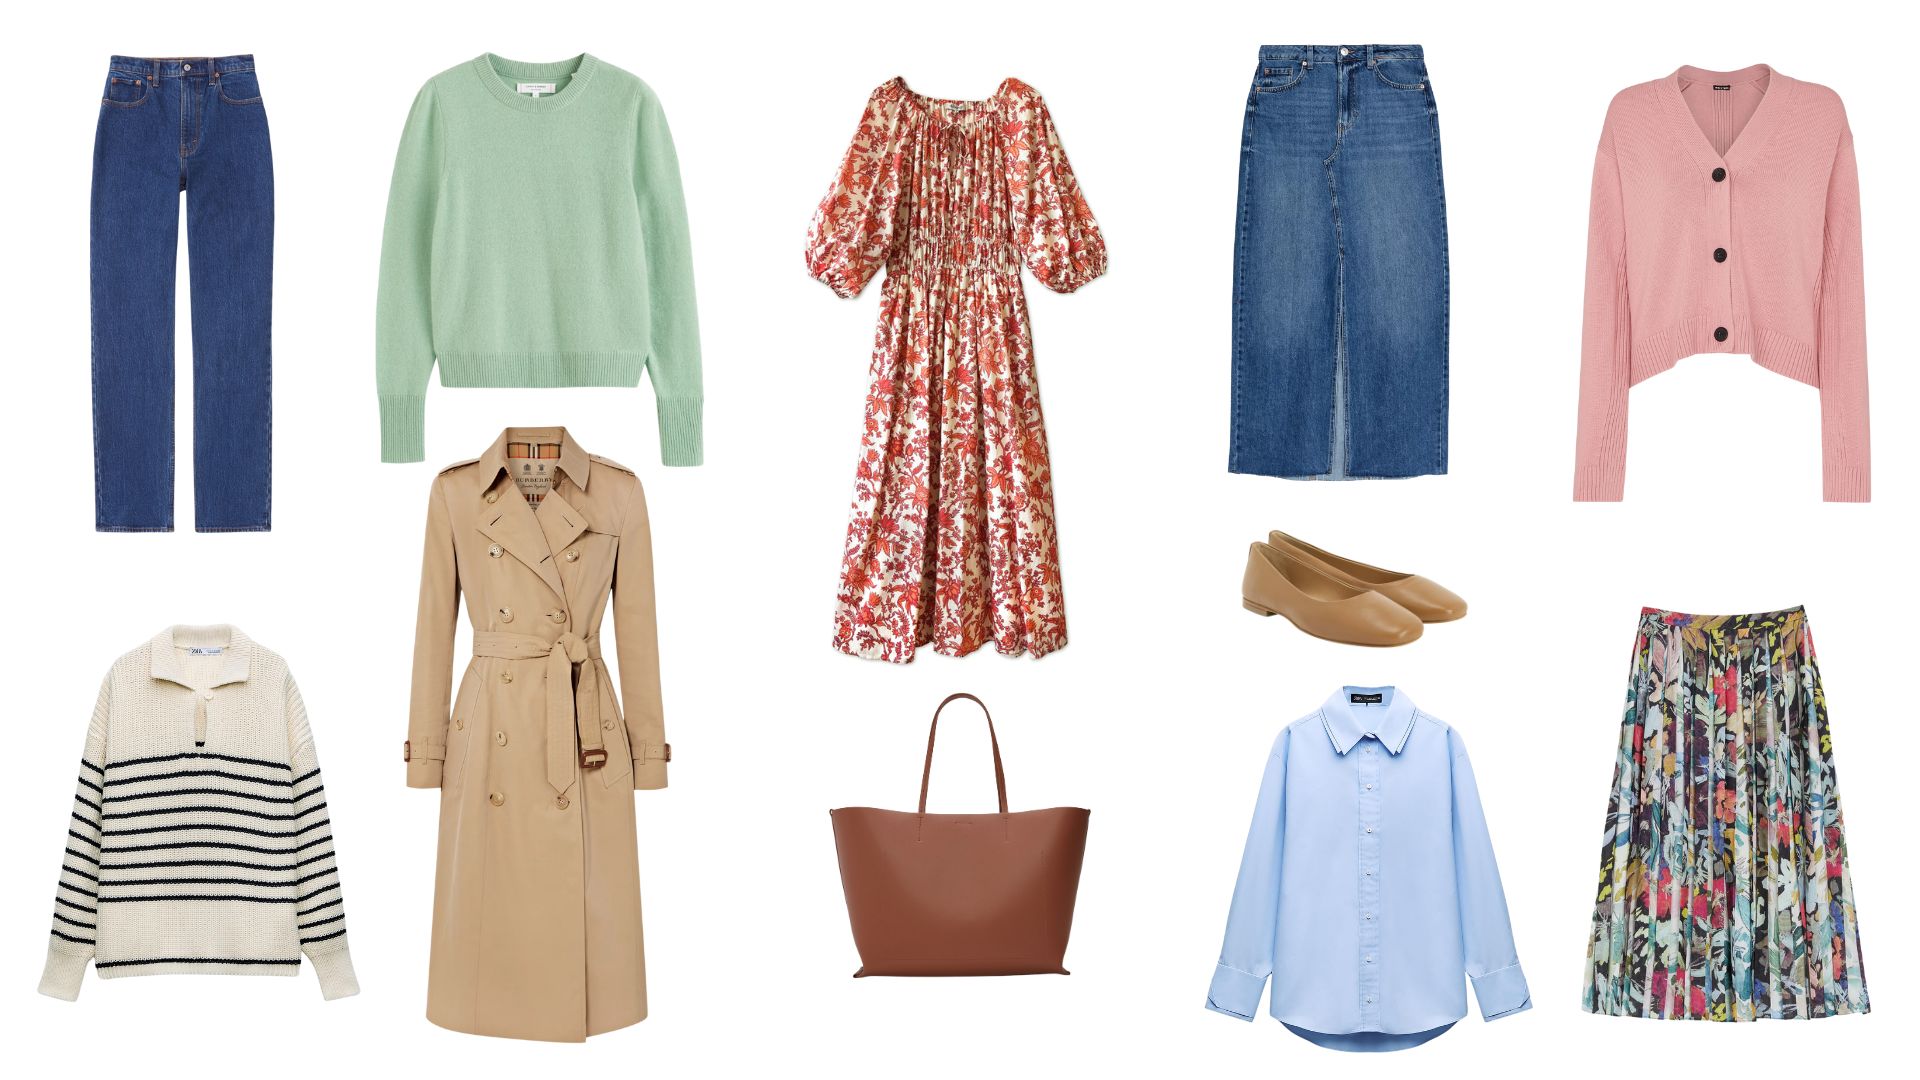 Stylish Zara Spring Outfits to Upgrade Your Closet